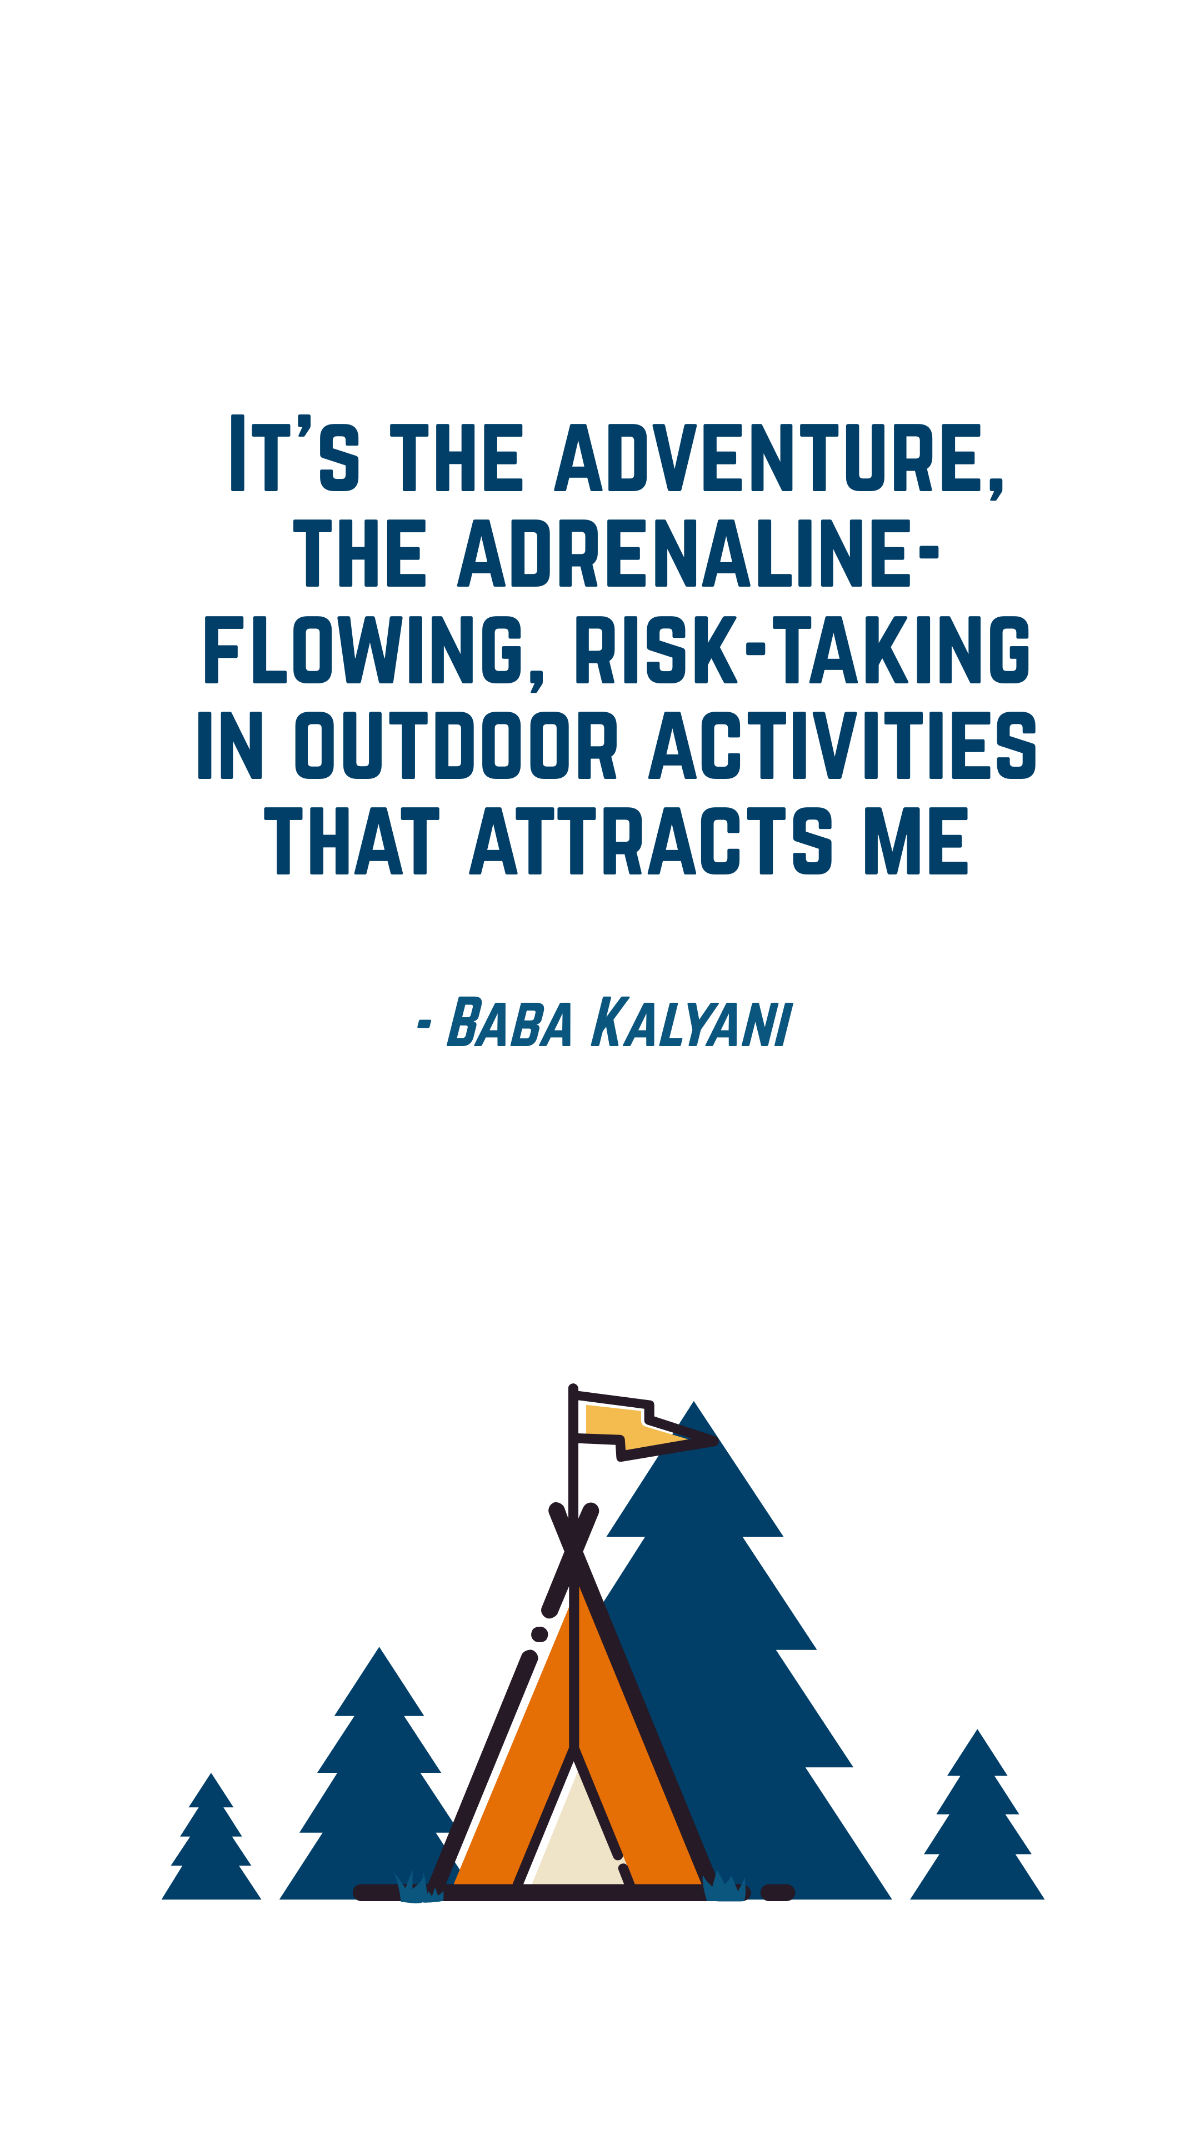 Baba Kalyani - It's the adventure, the adrenaline-flowing, risk-taking in outdoor activities that attracts me Template